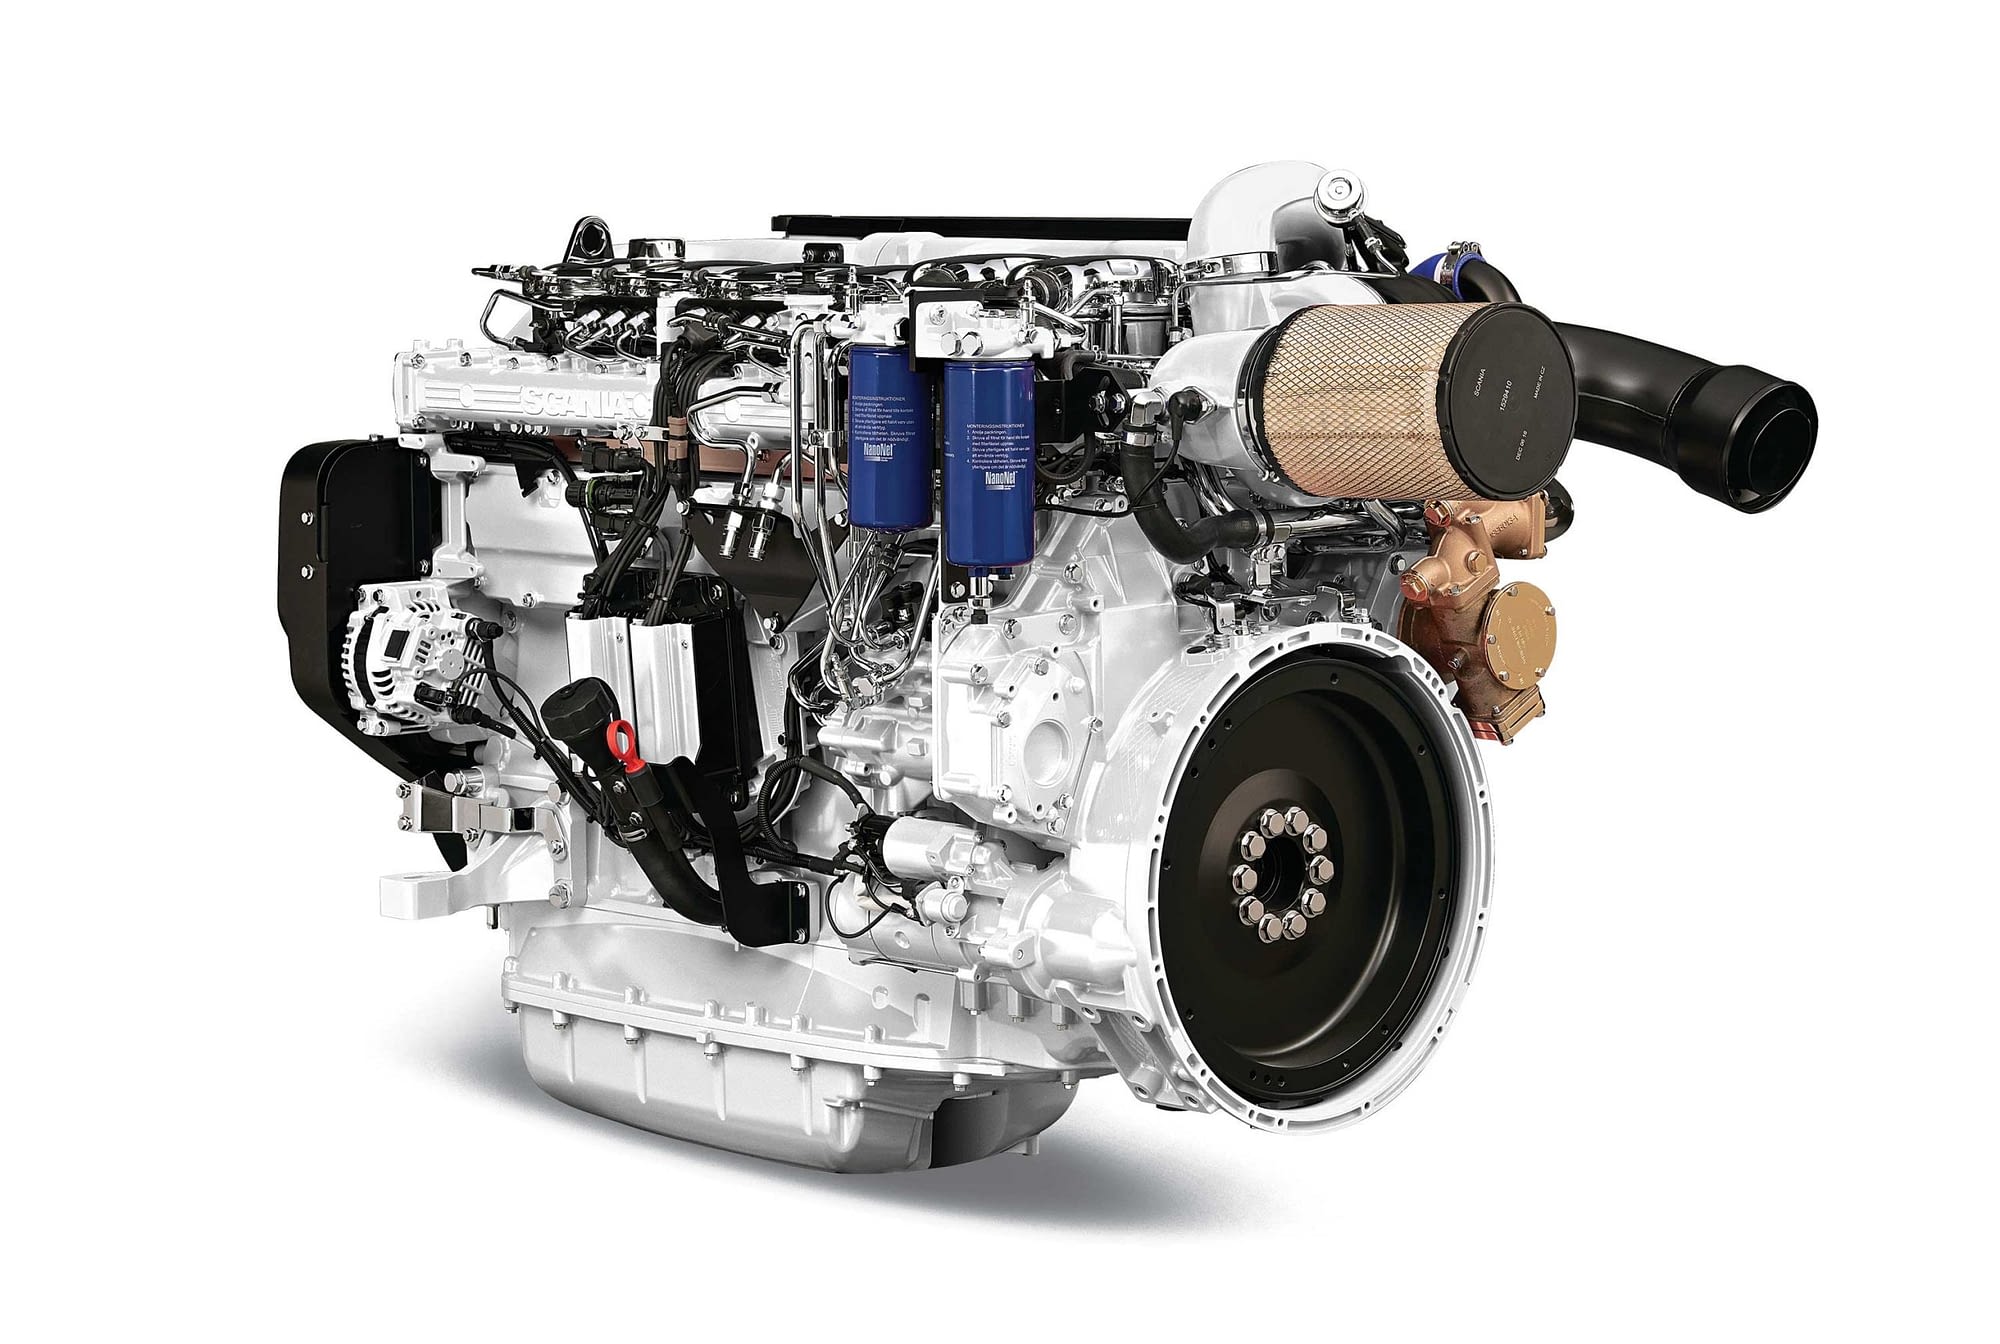 Product shot for Scania DI13 engine